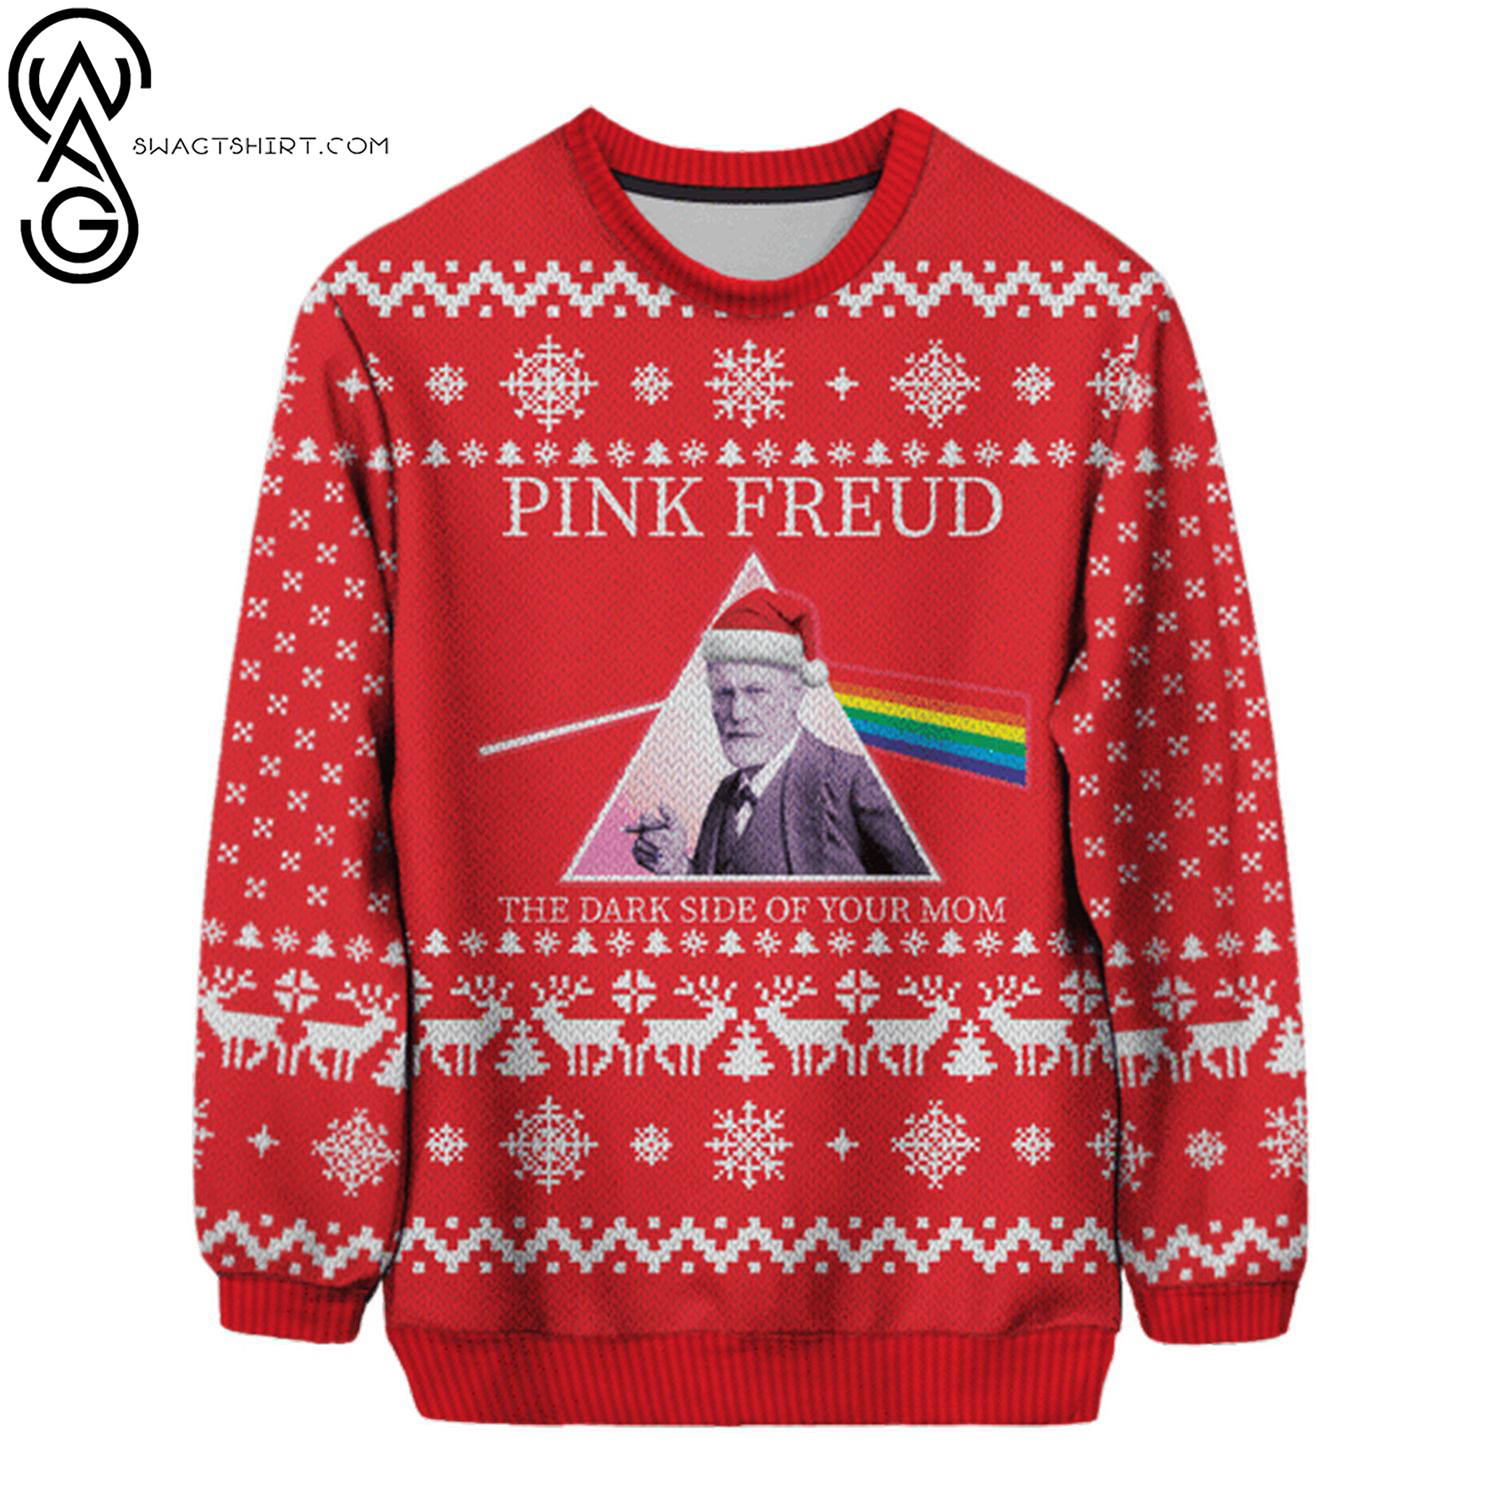 Pink freud the dark side of your mom ugly christmas sweater